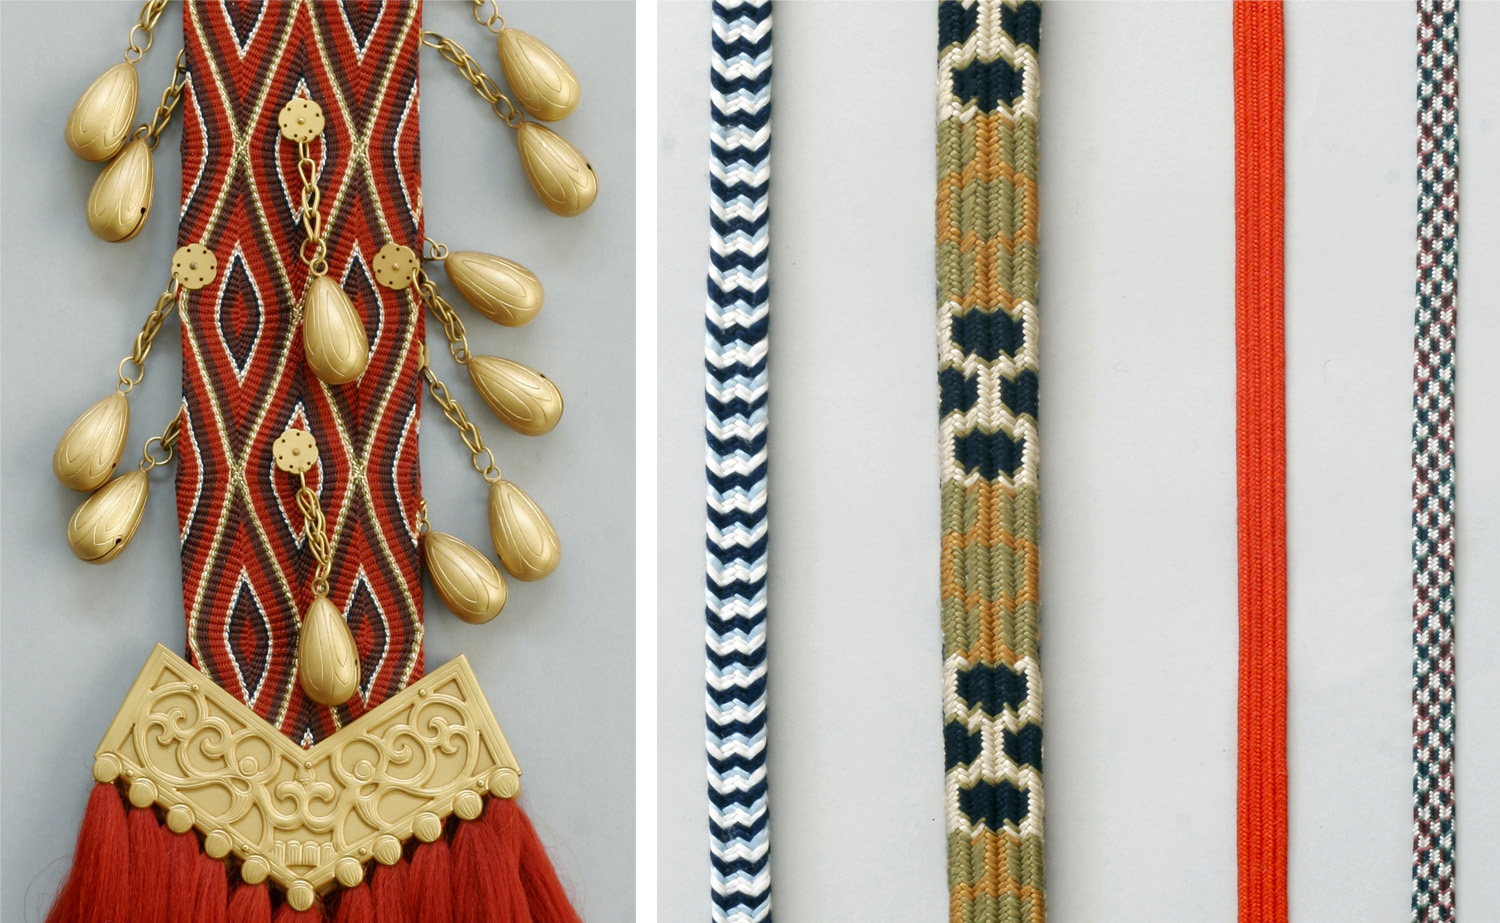 replica of Horyuji beaded sash, Replicas of cords for hanging swords and binding hilts from the Kamakura period